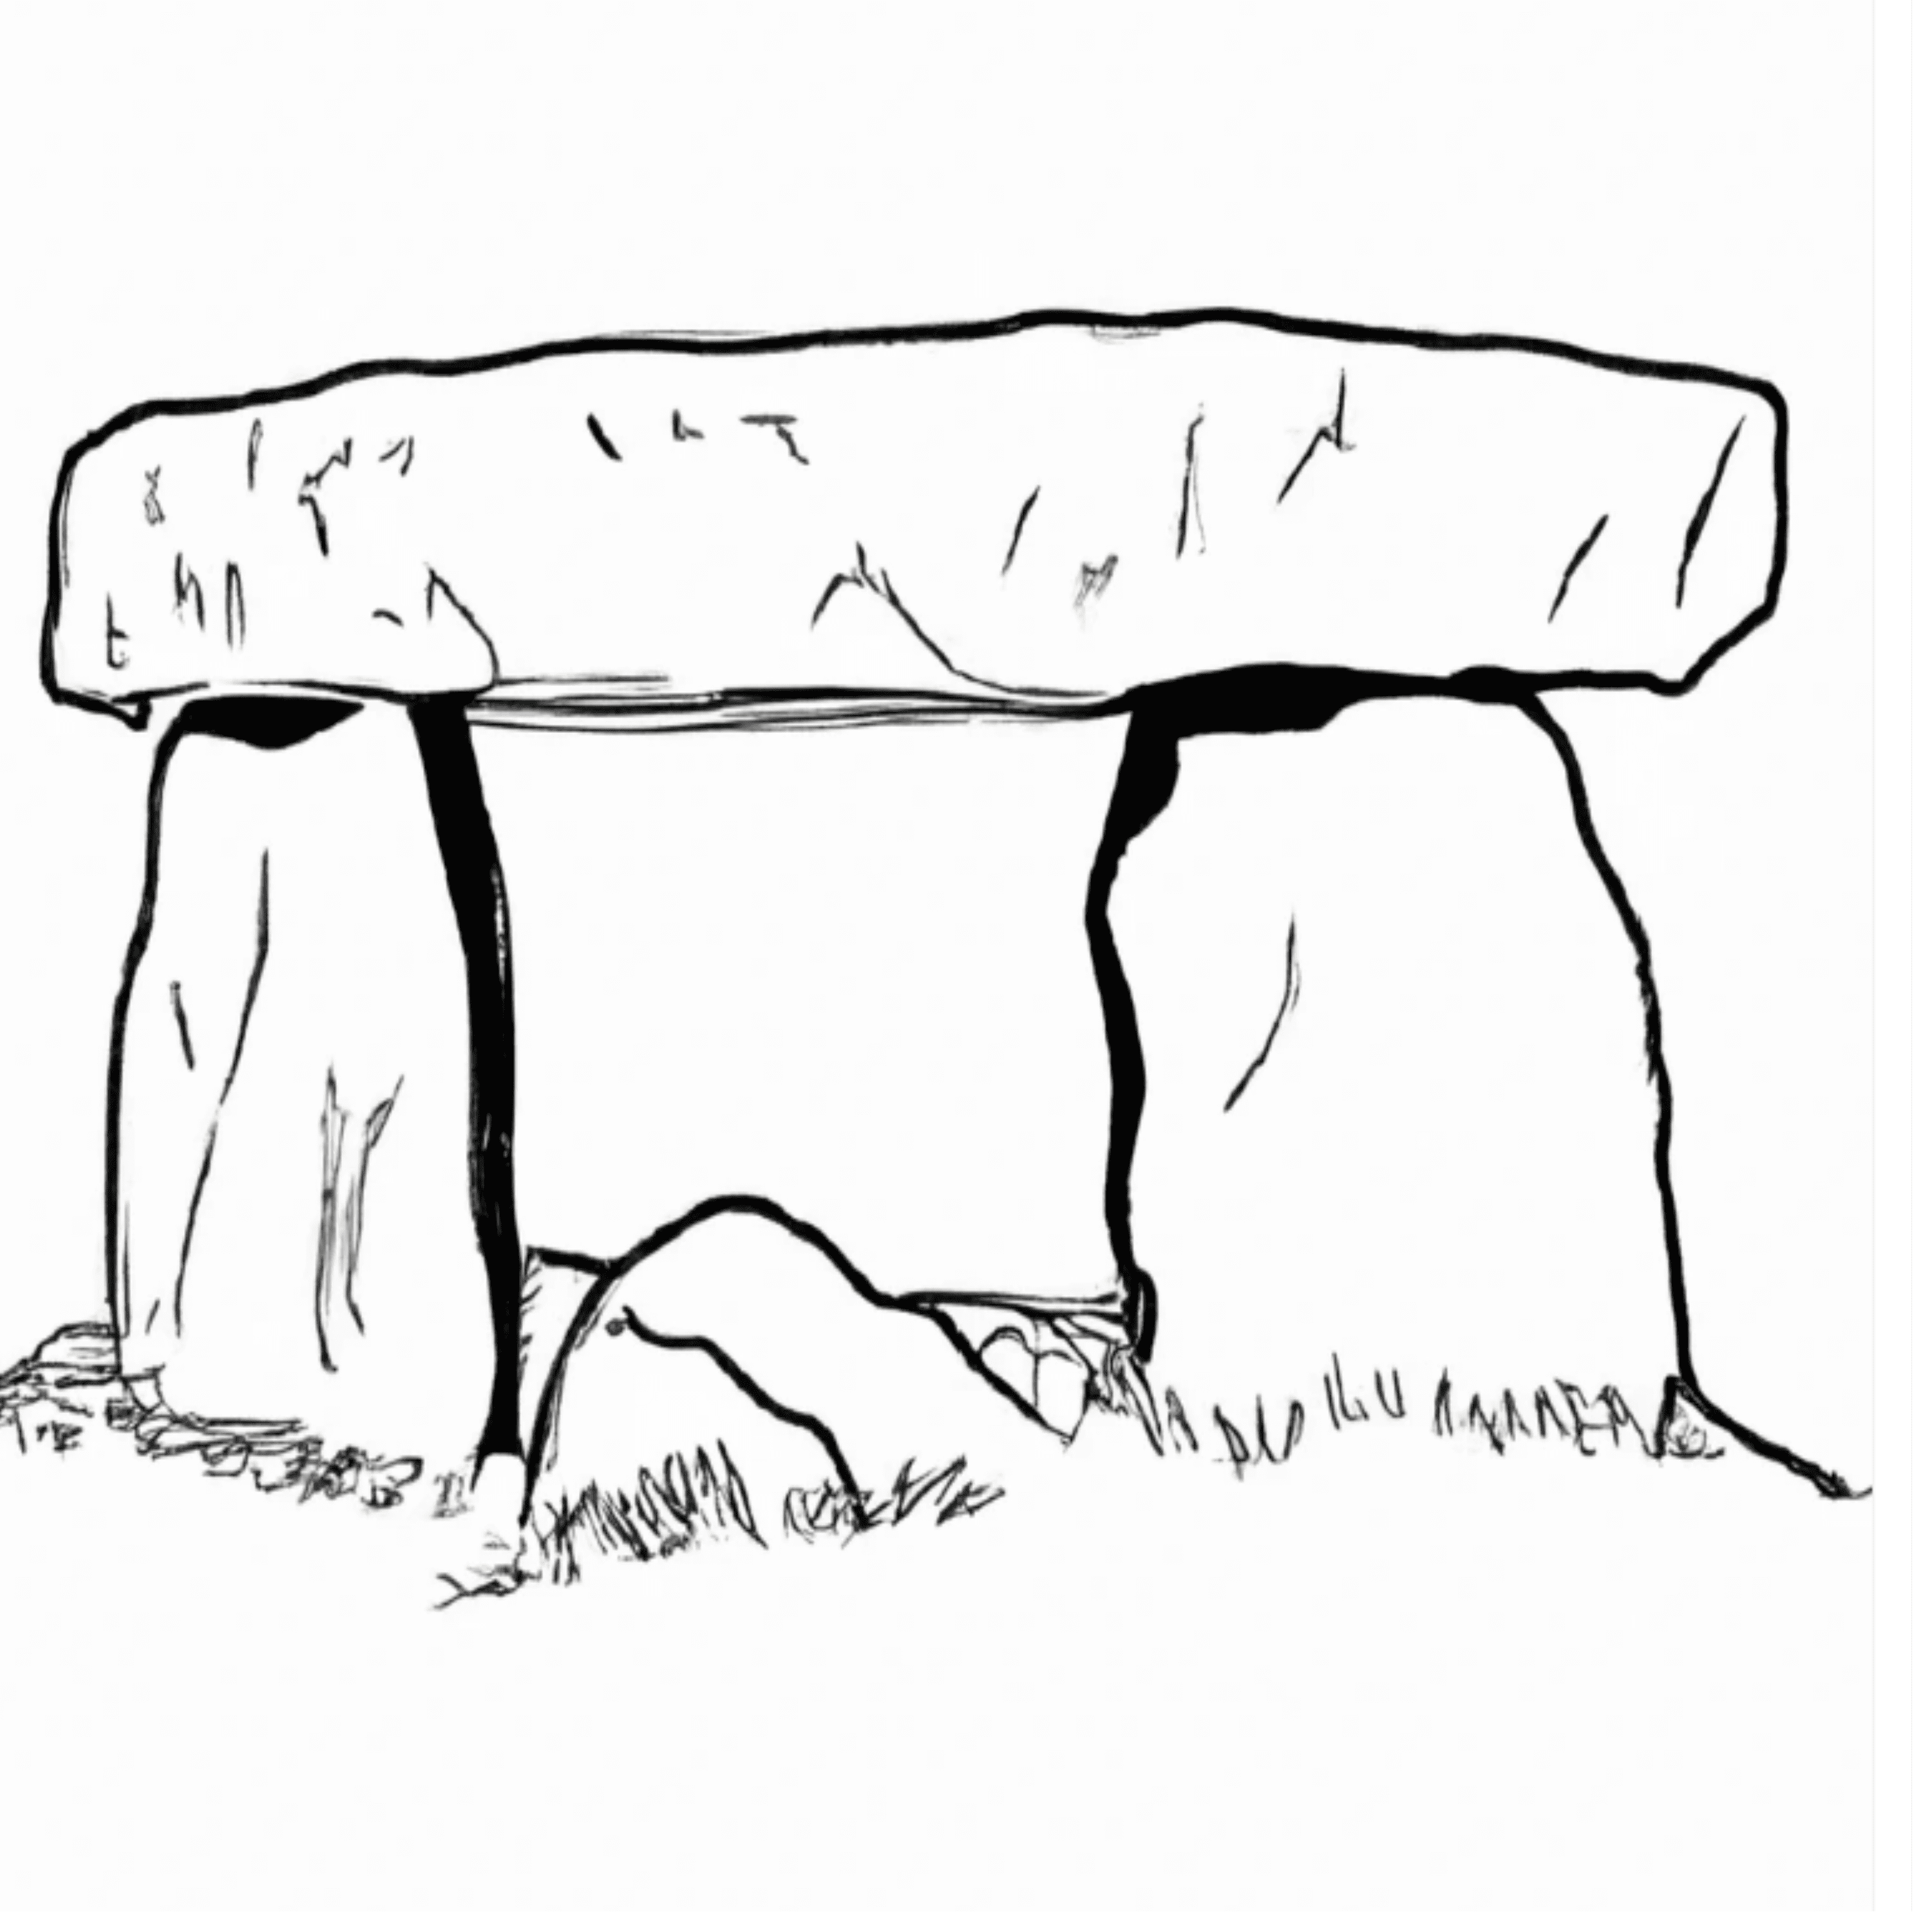 Line drawing of a dolmen